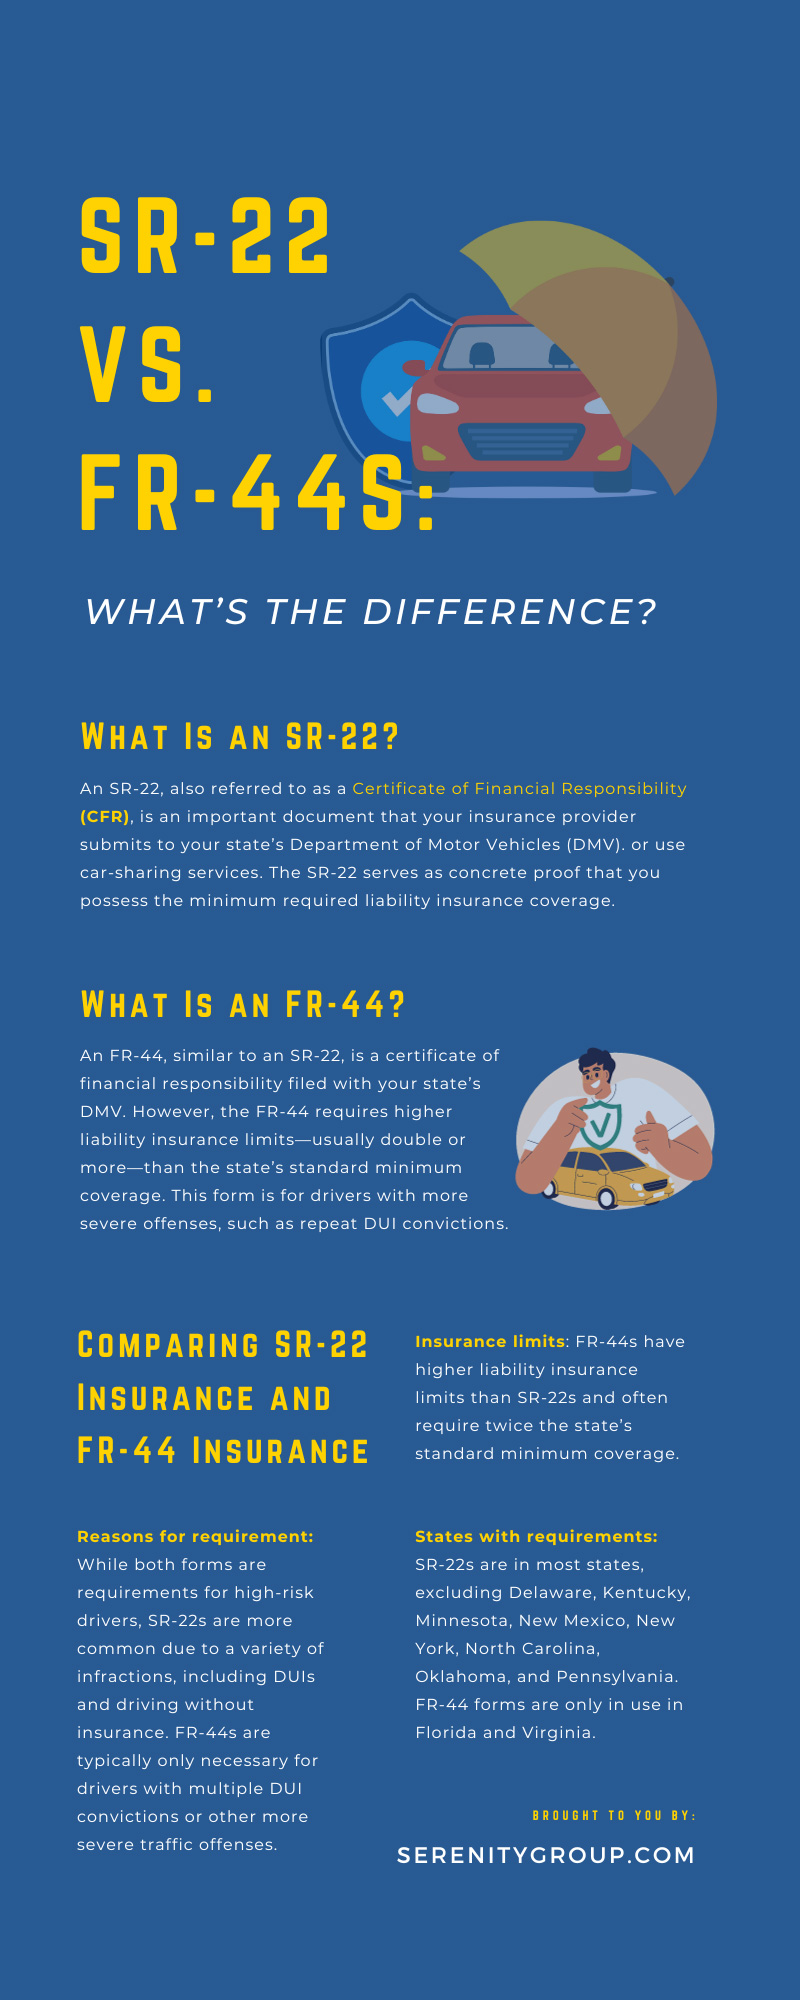 SR-22 vs. FR-44s: What’s the Difference?
